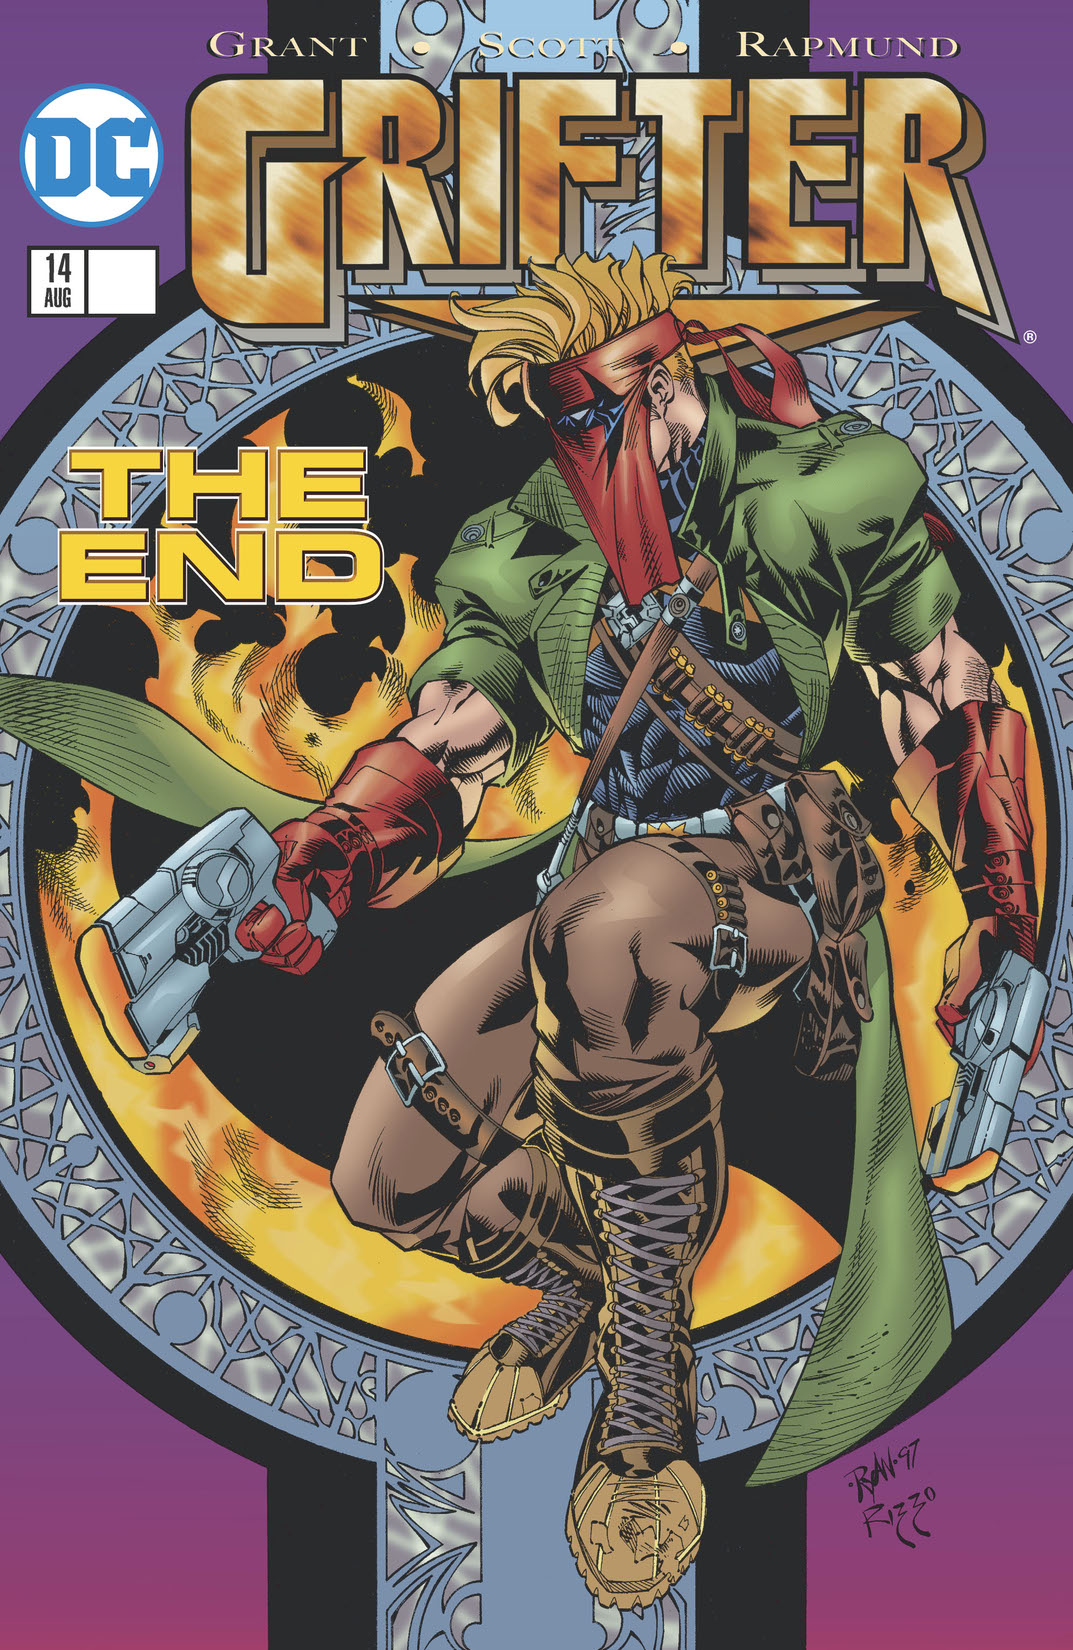 Grifter (1996-1997) #14 preview images